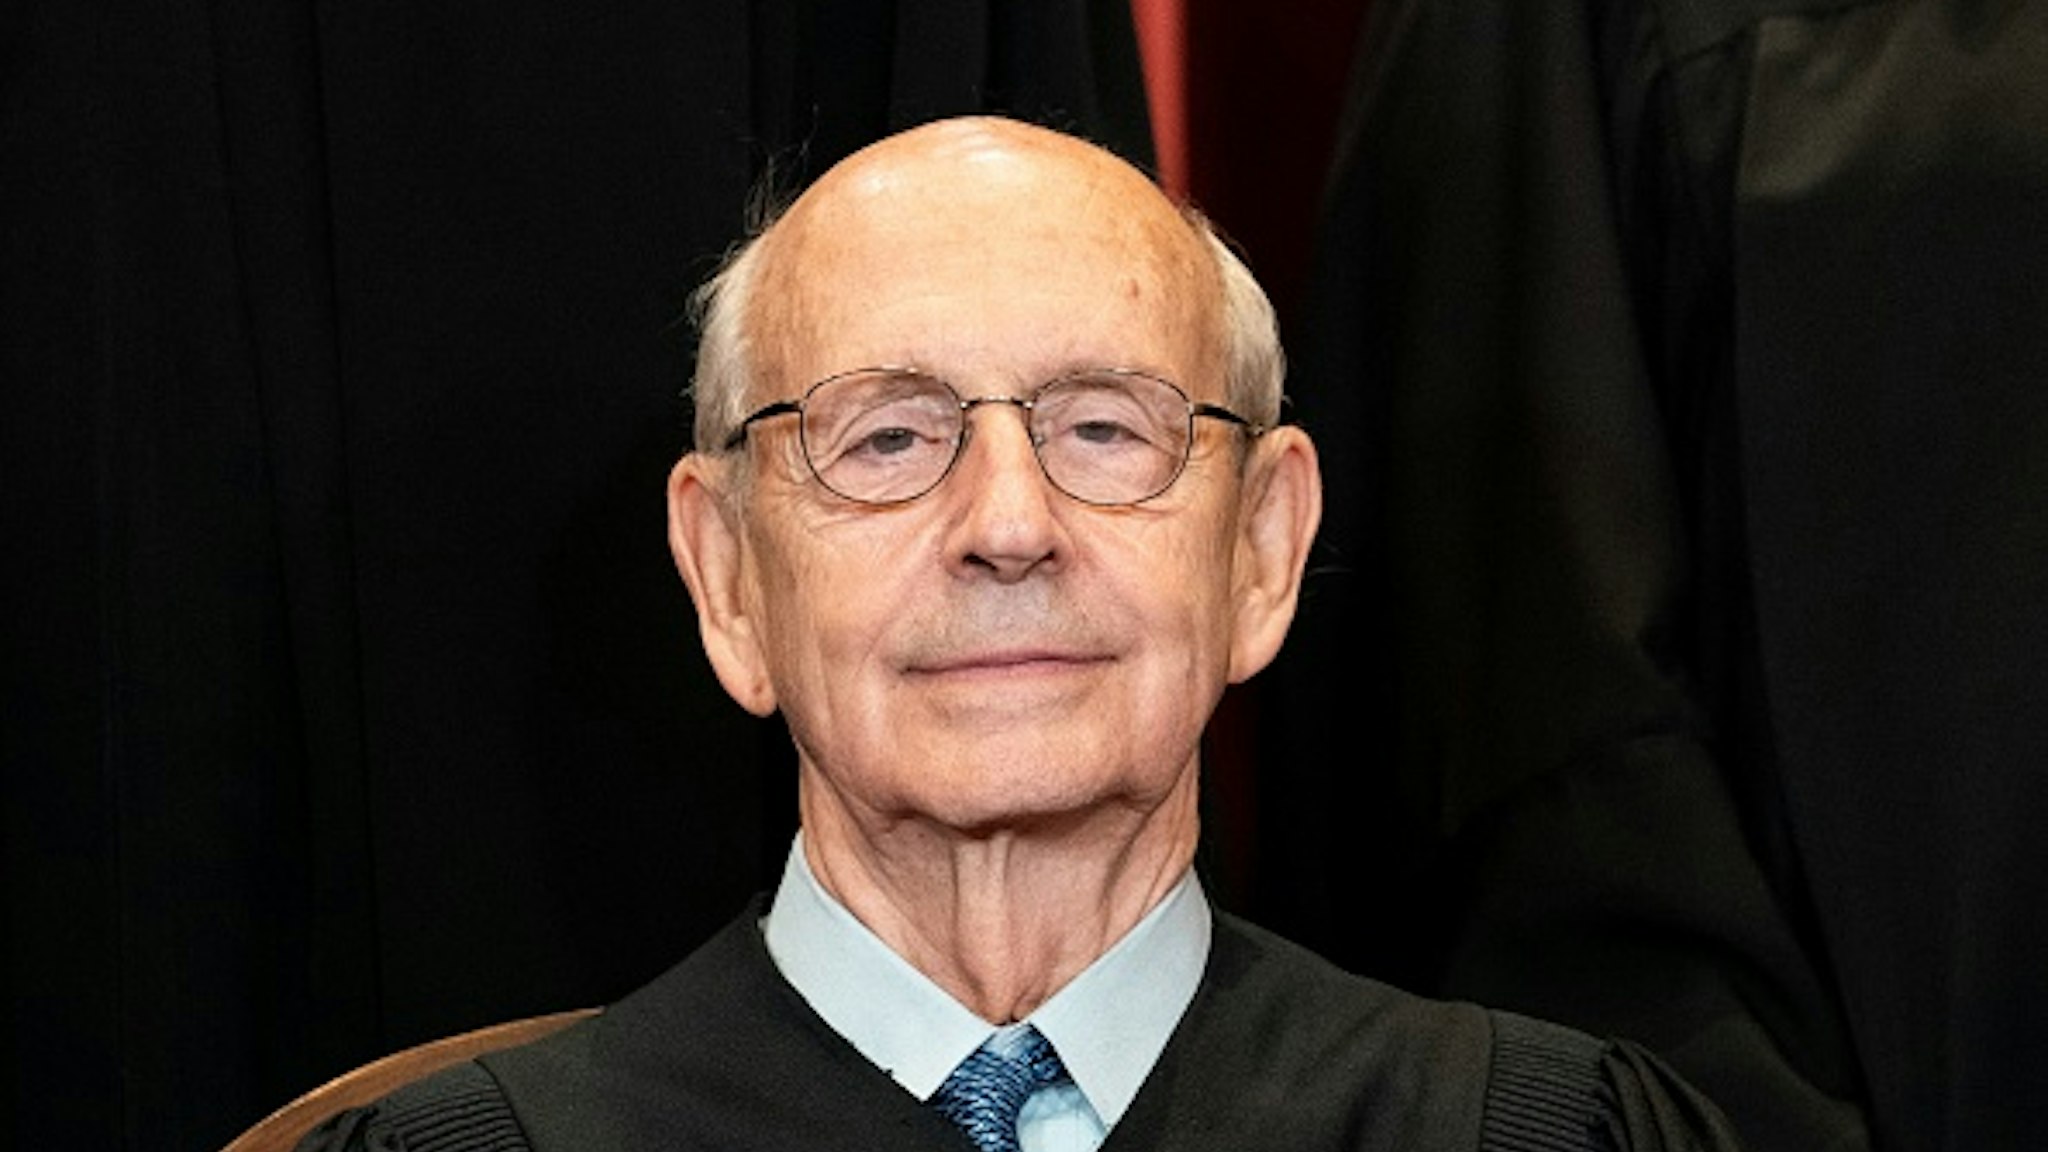 Associate Justice Stephen Breyer sits during a group photo of the Justices at the Supreme Court in Washington, DC on April 23, 2021.